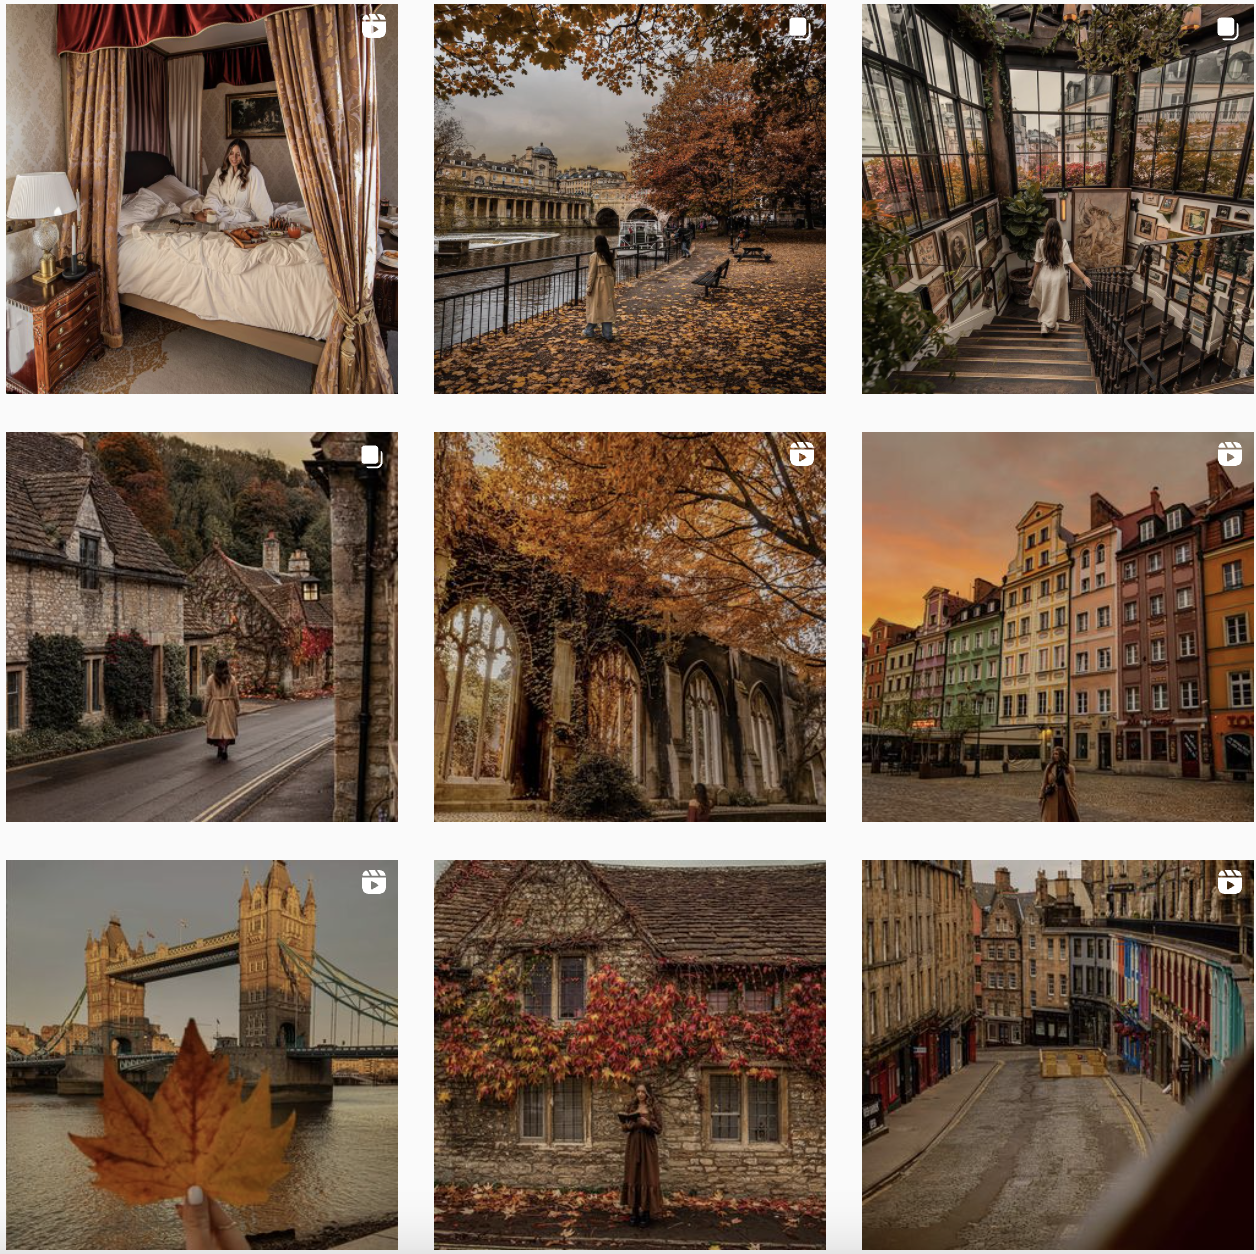 Travel blogger Kelsey of @kelseyinlondon uses warm tones to highlight her beautiful travel shots.